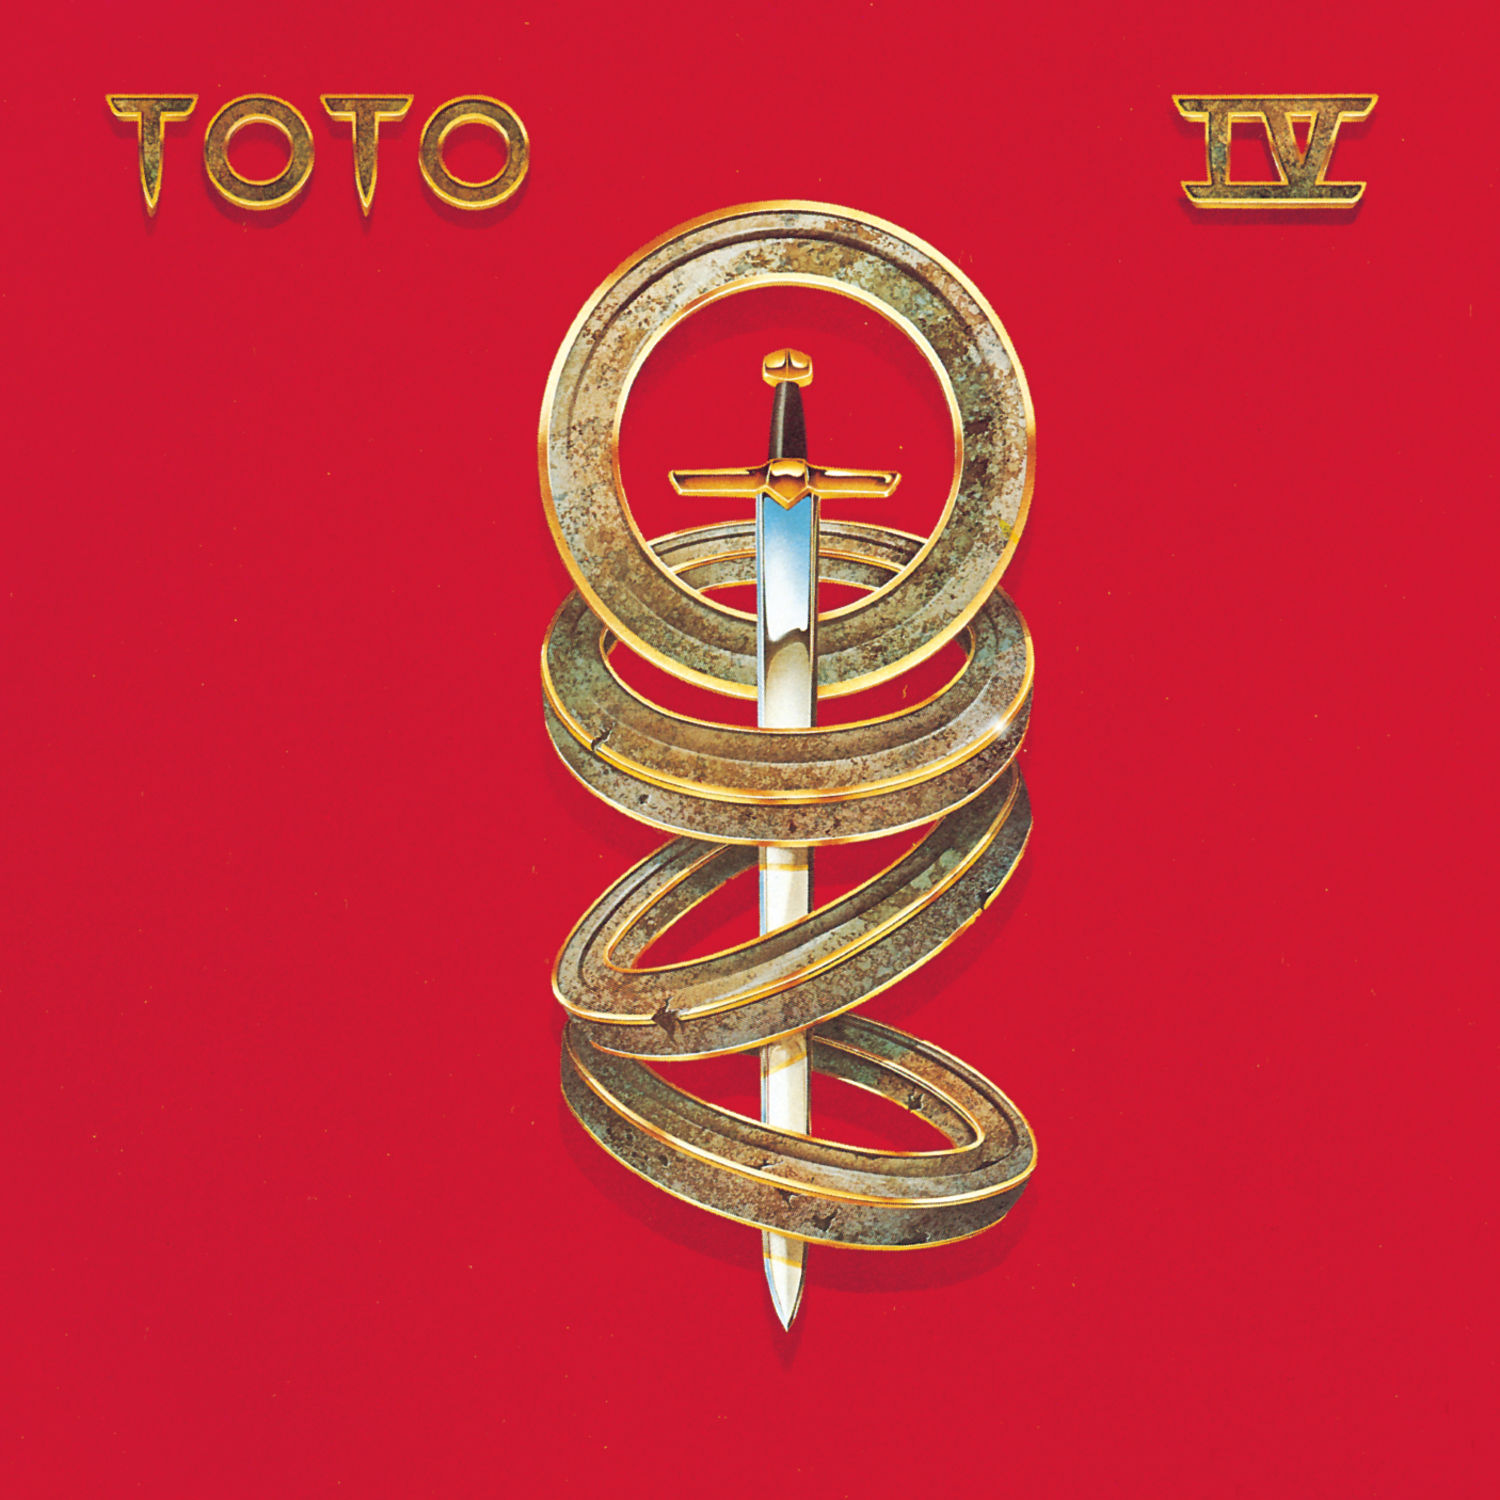 Art for Africa by Toto